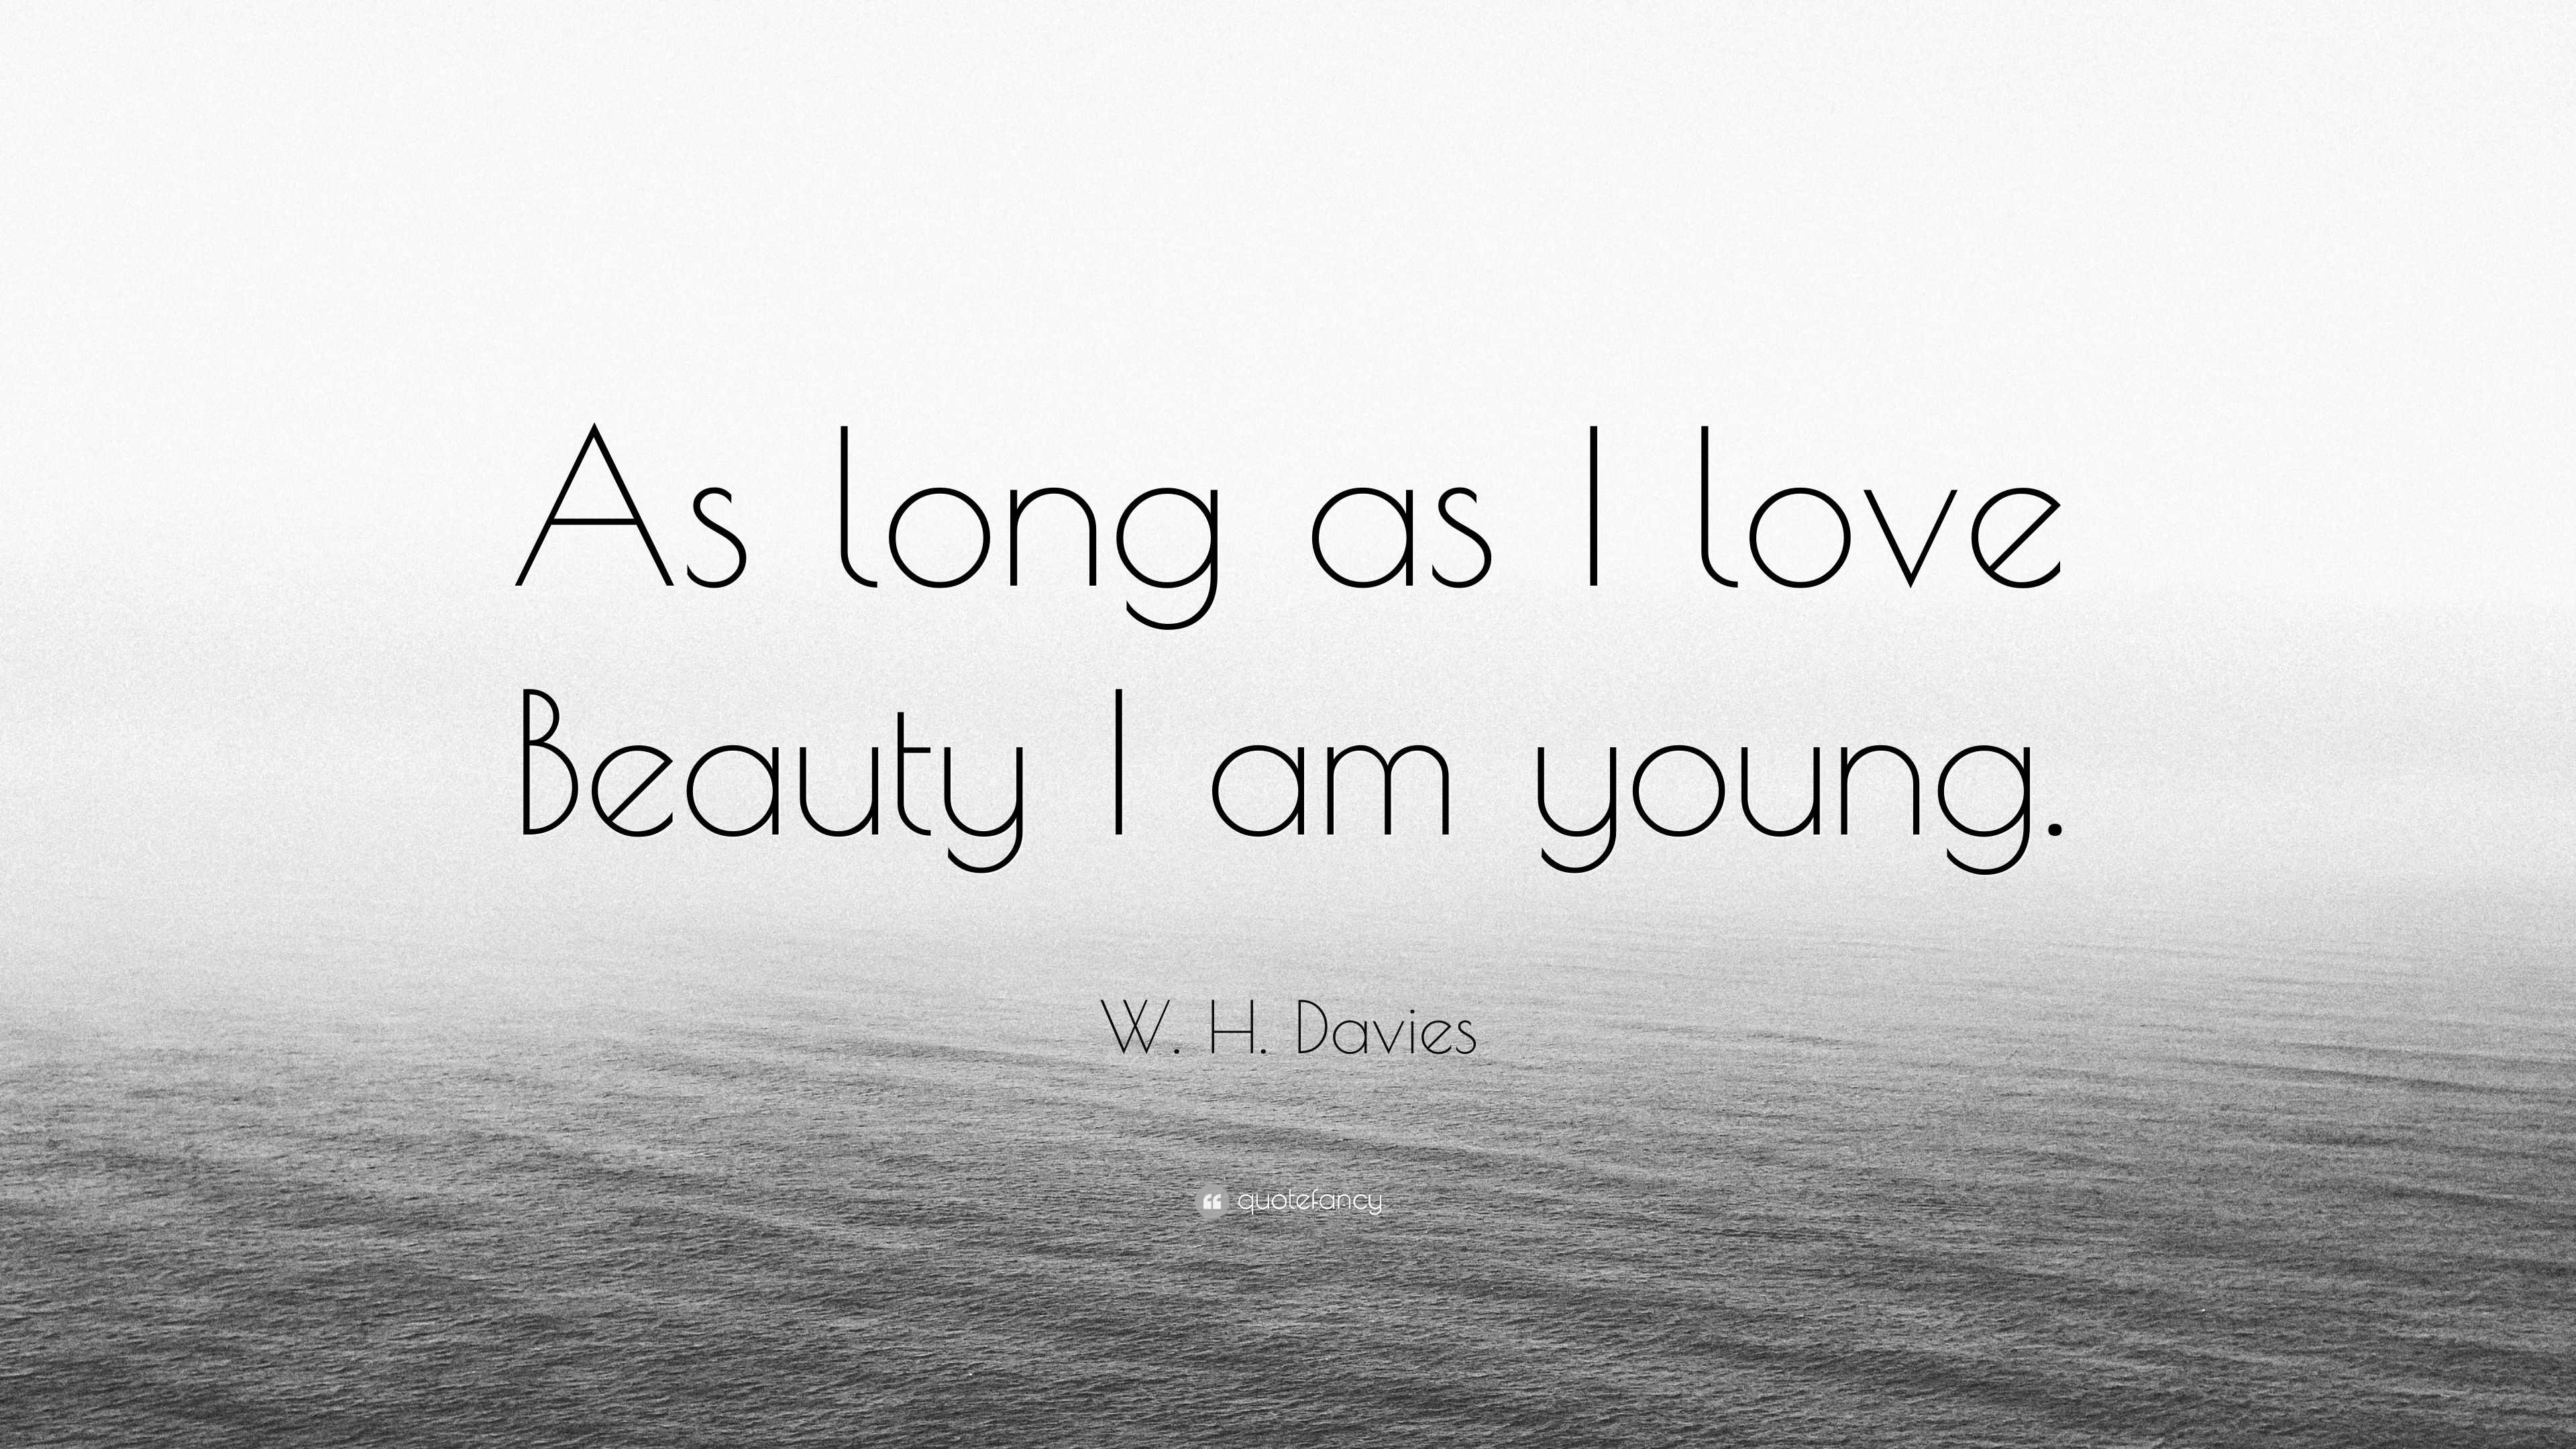 W H Davies Quote “As long as I love Beauty I am young ”